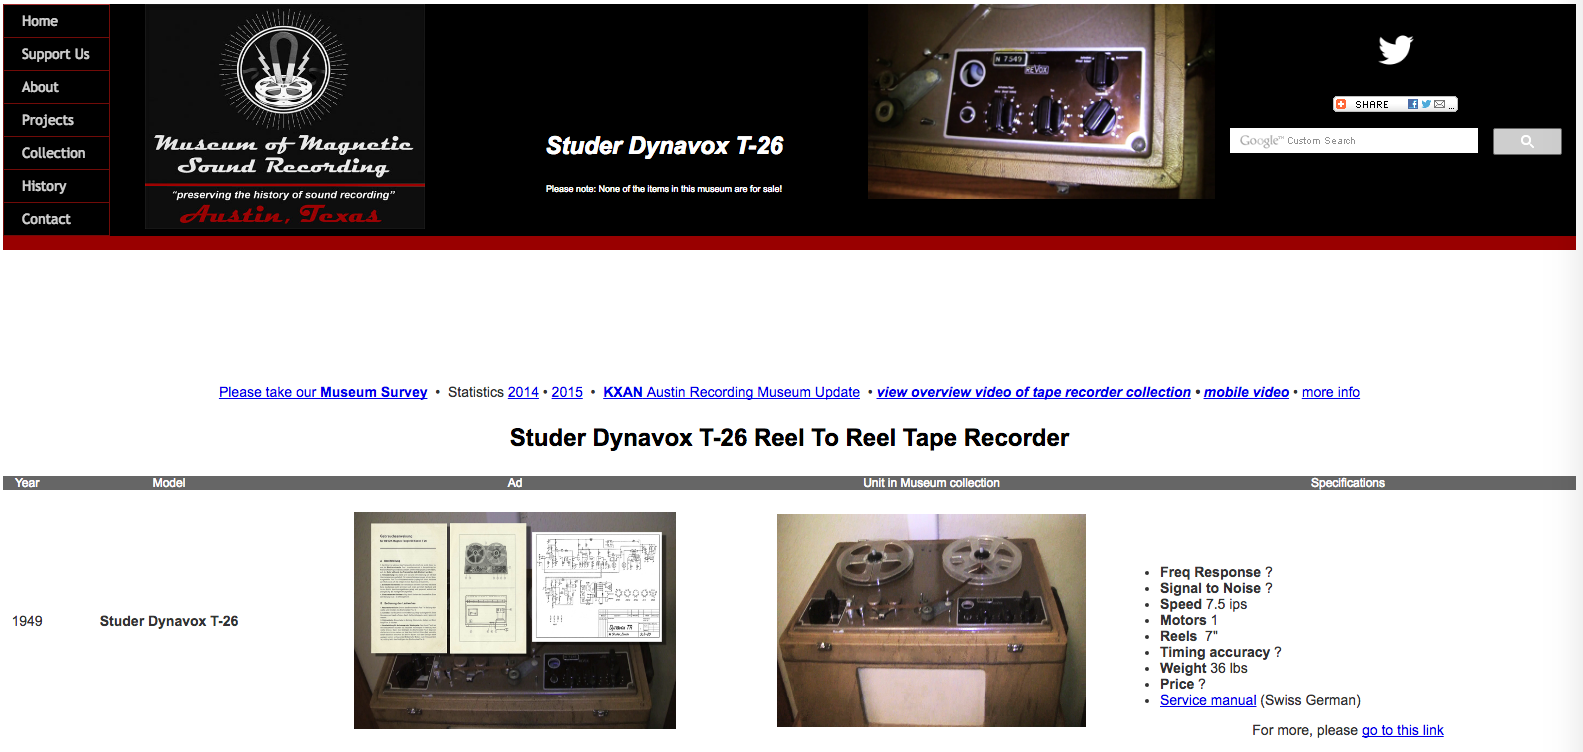 Reel to Reel Tape Recorder Manufacturers - TEAC corporation • Tascam -  Museum of Magnetic Sound Recording